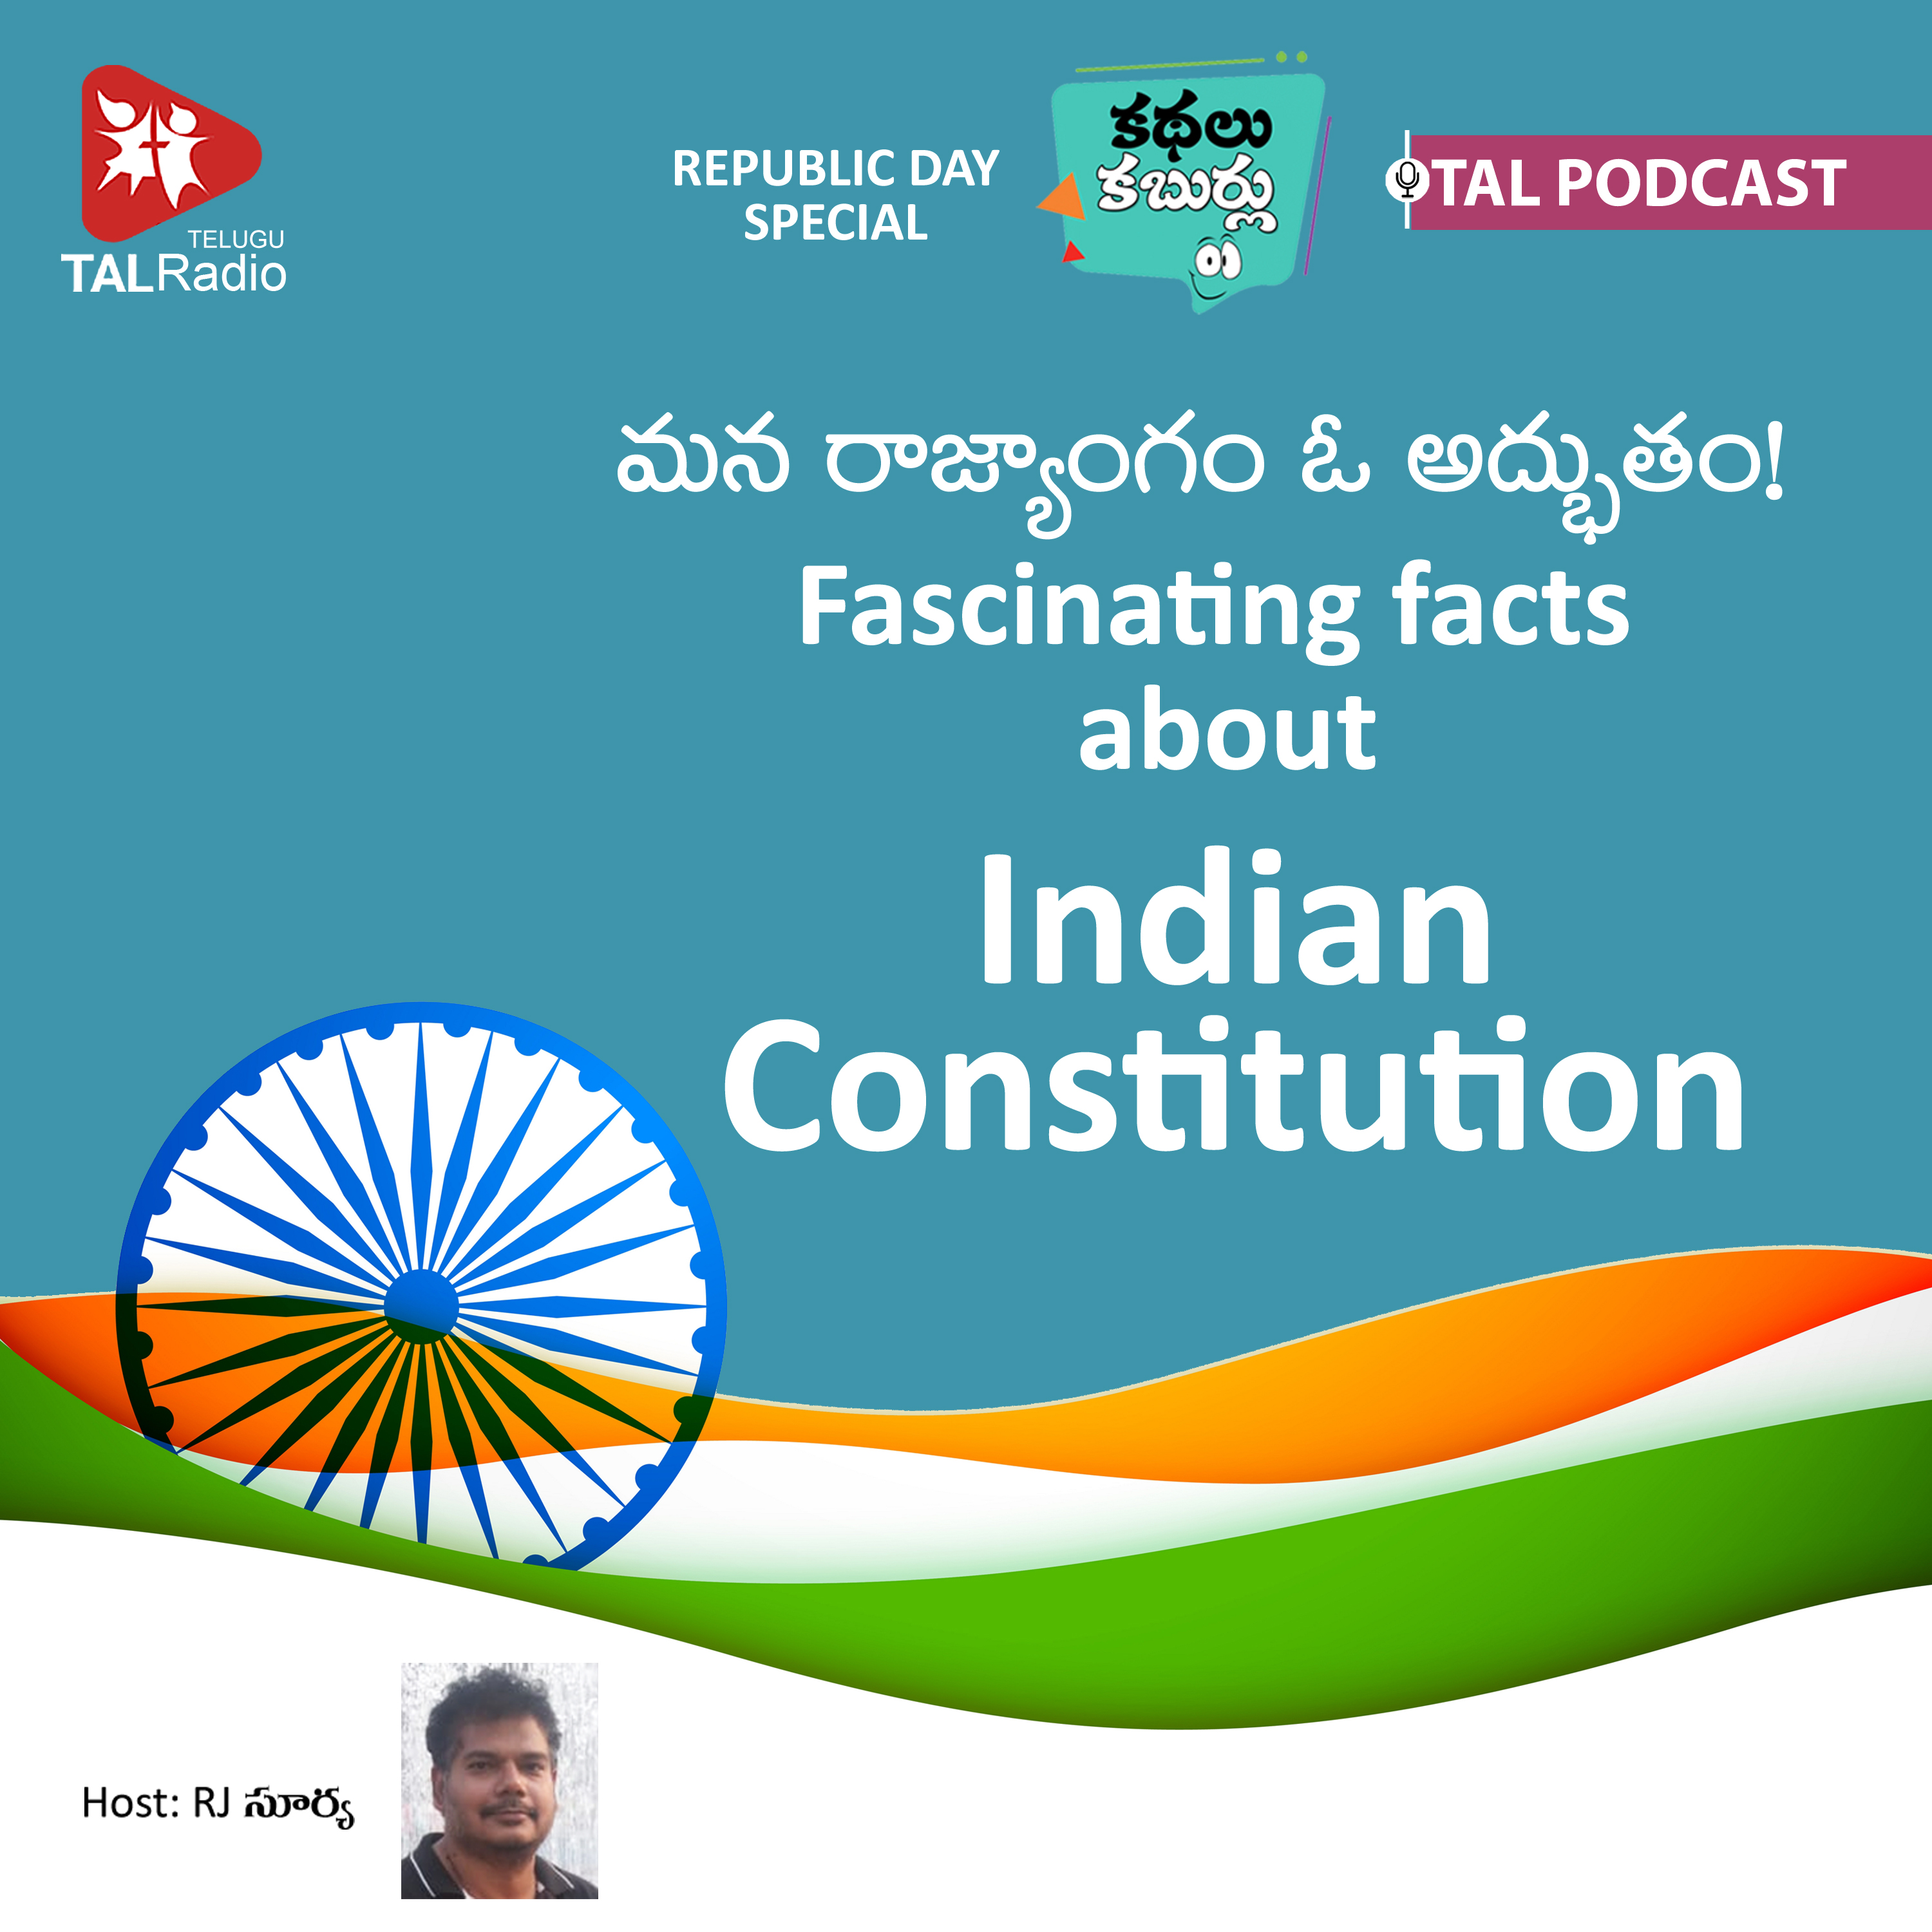 Why is Our Constitution An Amazing Feat | Republic Day Special